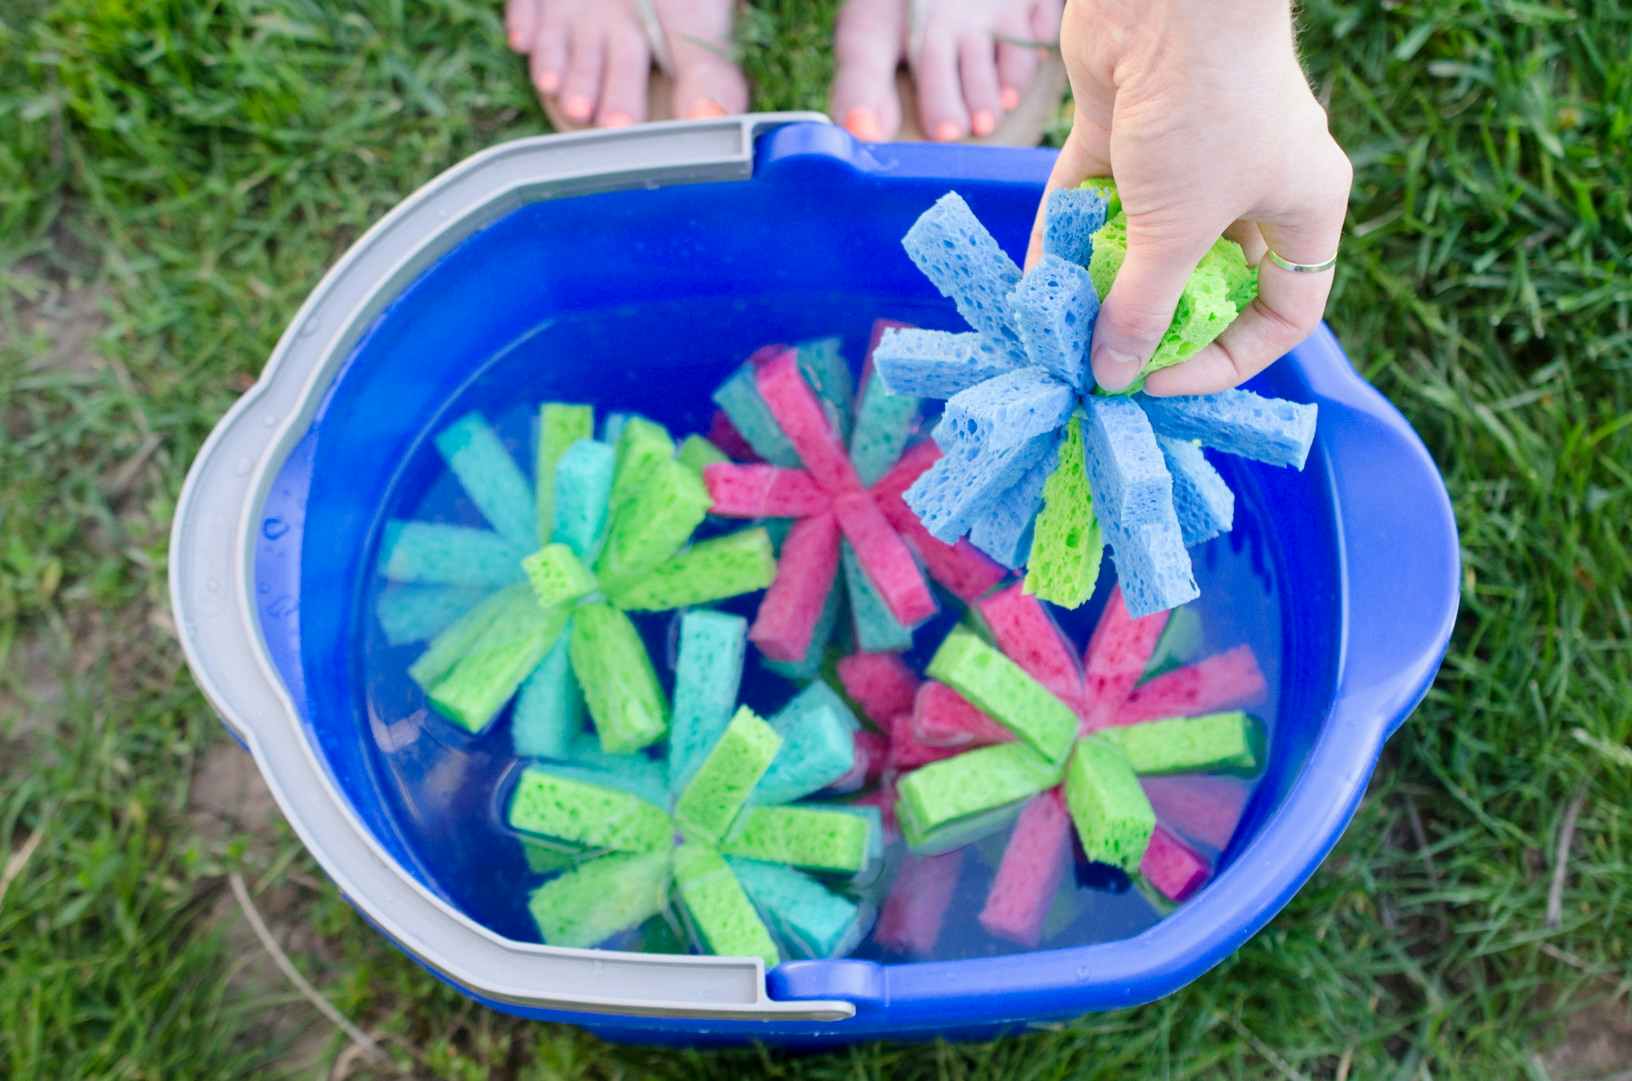 A bucket of sponges that have been cut to look like balls in a bucket of water.